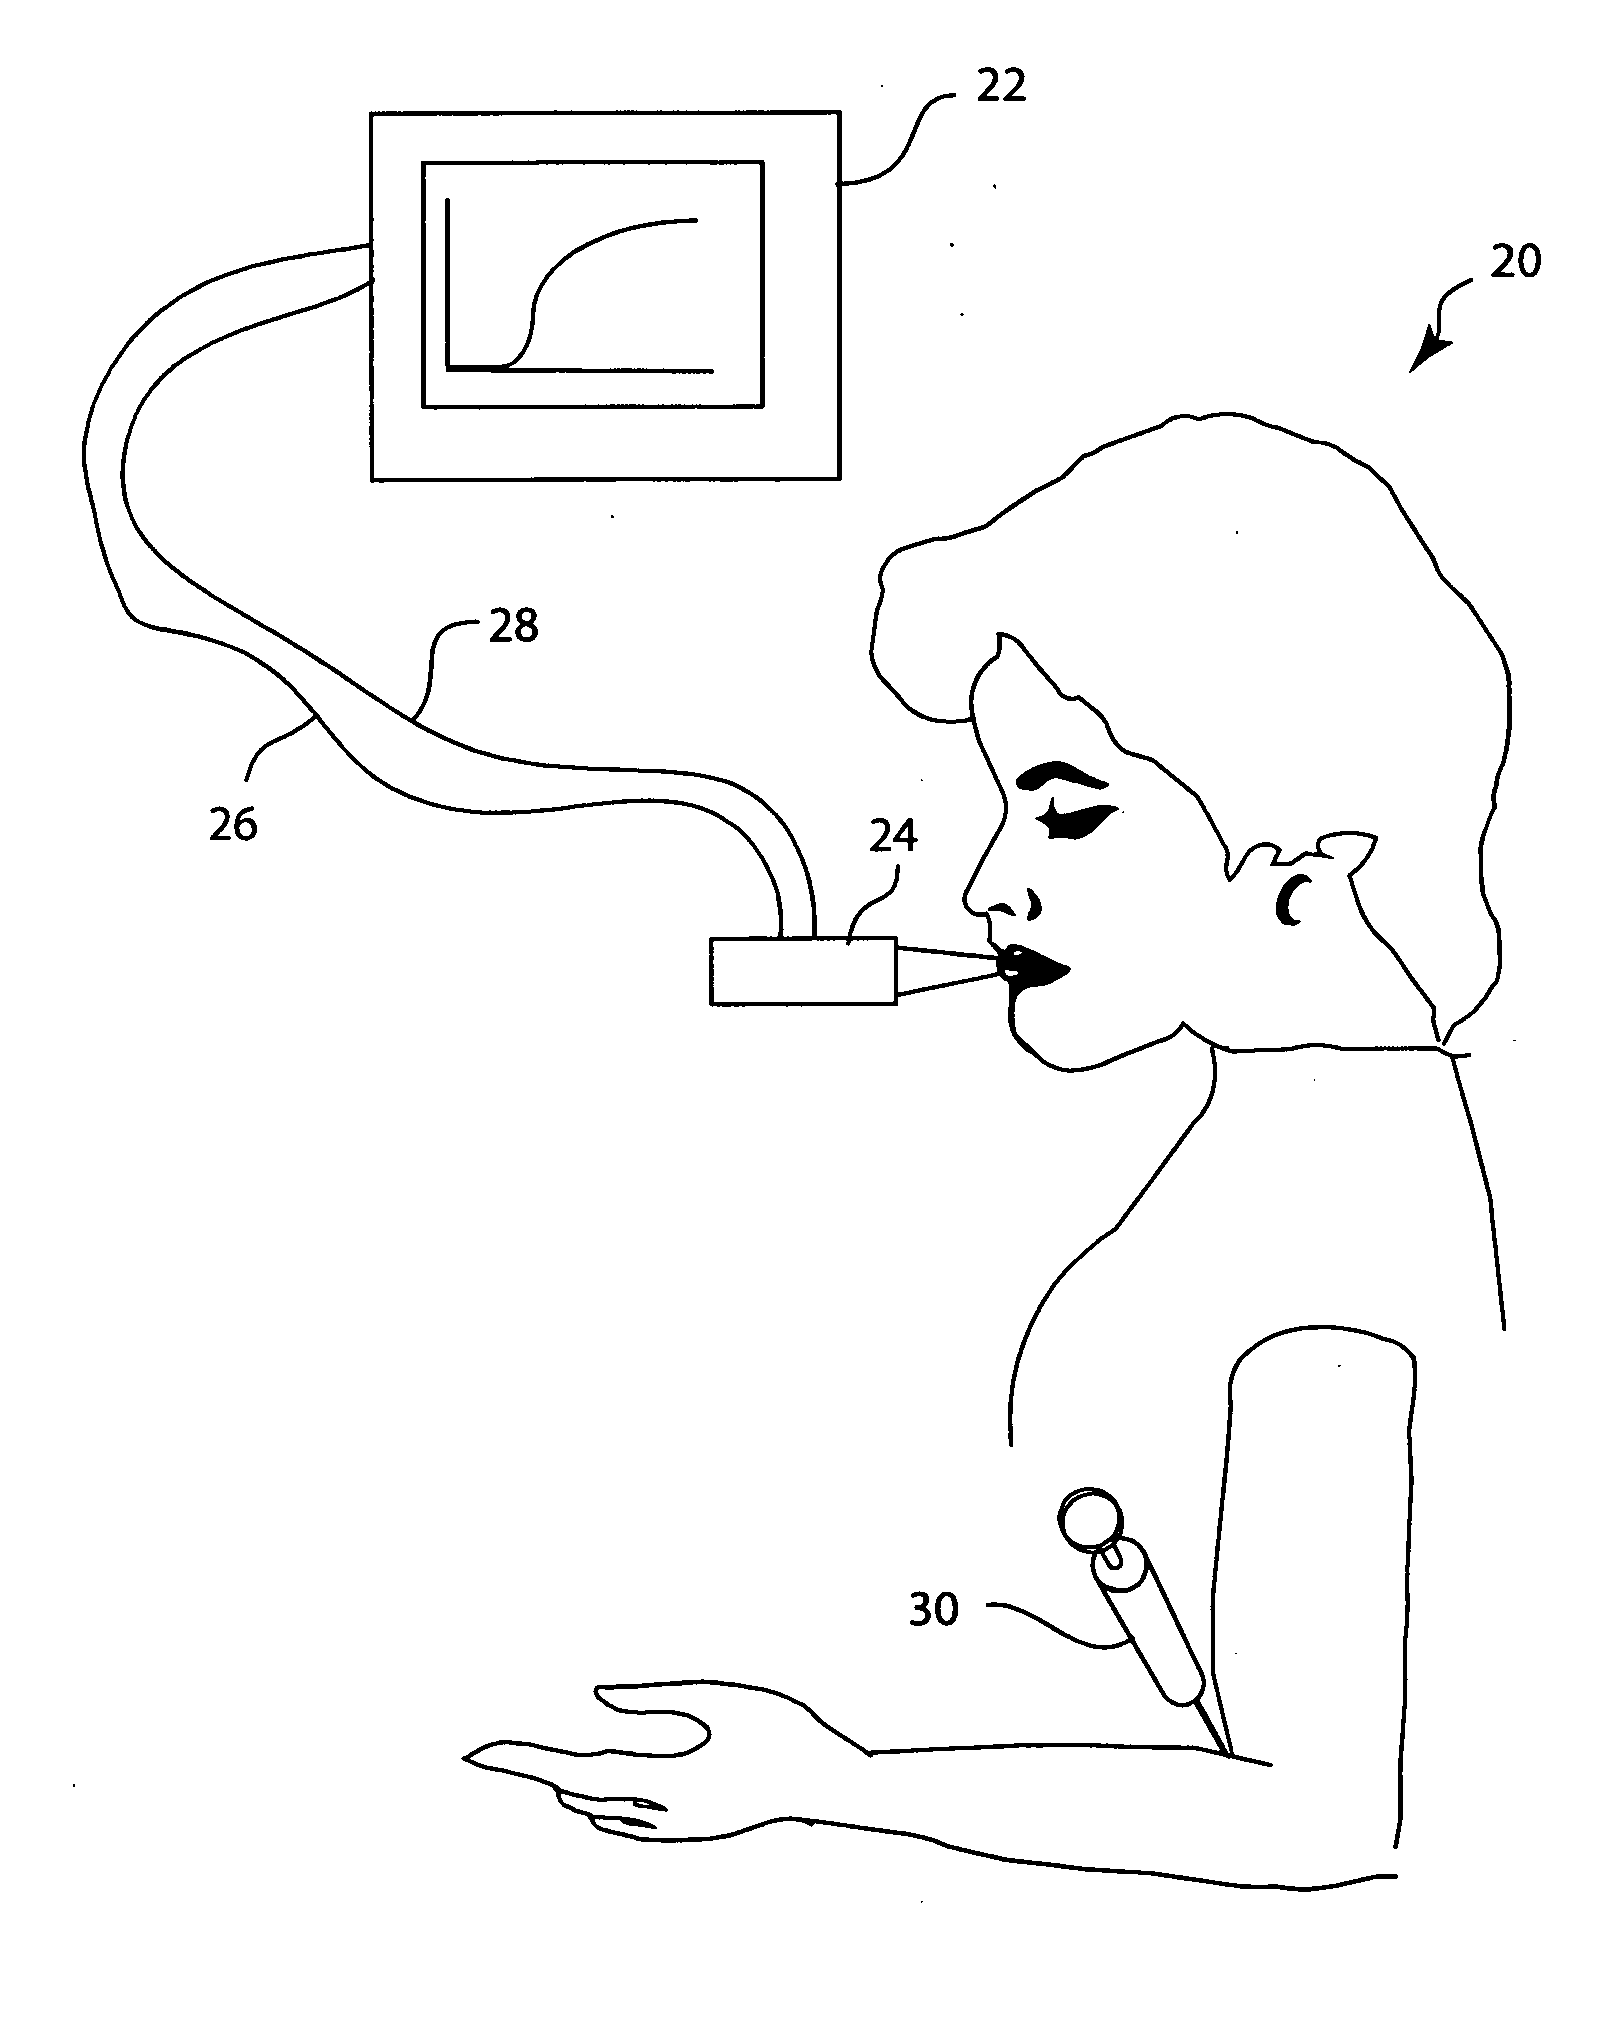 Method and apparatus for producing an average signal characteristic profile from cyclically recurring signals